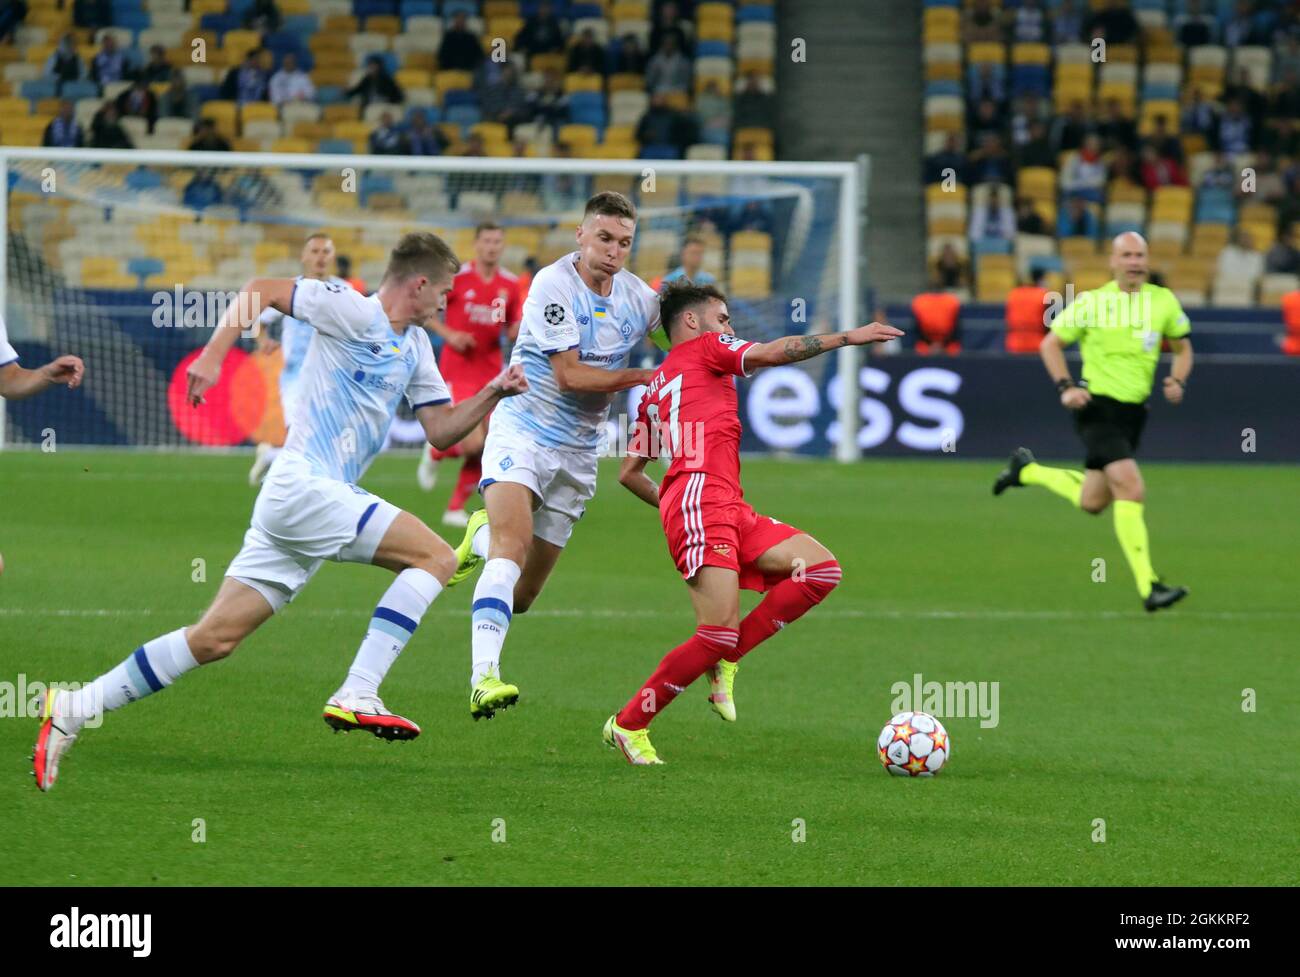 KYIV, UKRAINE - SEPTEMBER 14, 2021 - Players are seen in action during the  2021/2022 UEFA Champions League Group E game between FC Dynamo Kyiv and  S.L. Benfica Portugal which ended in